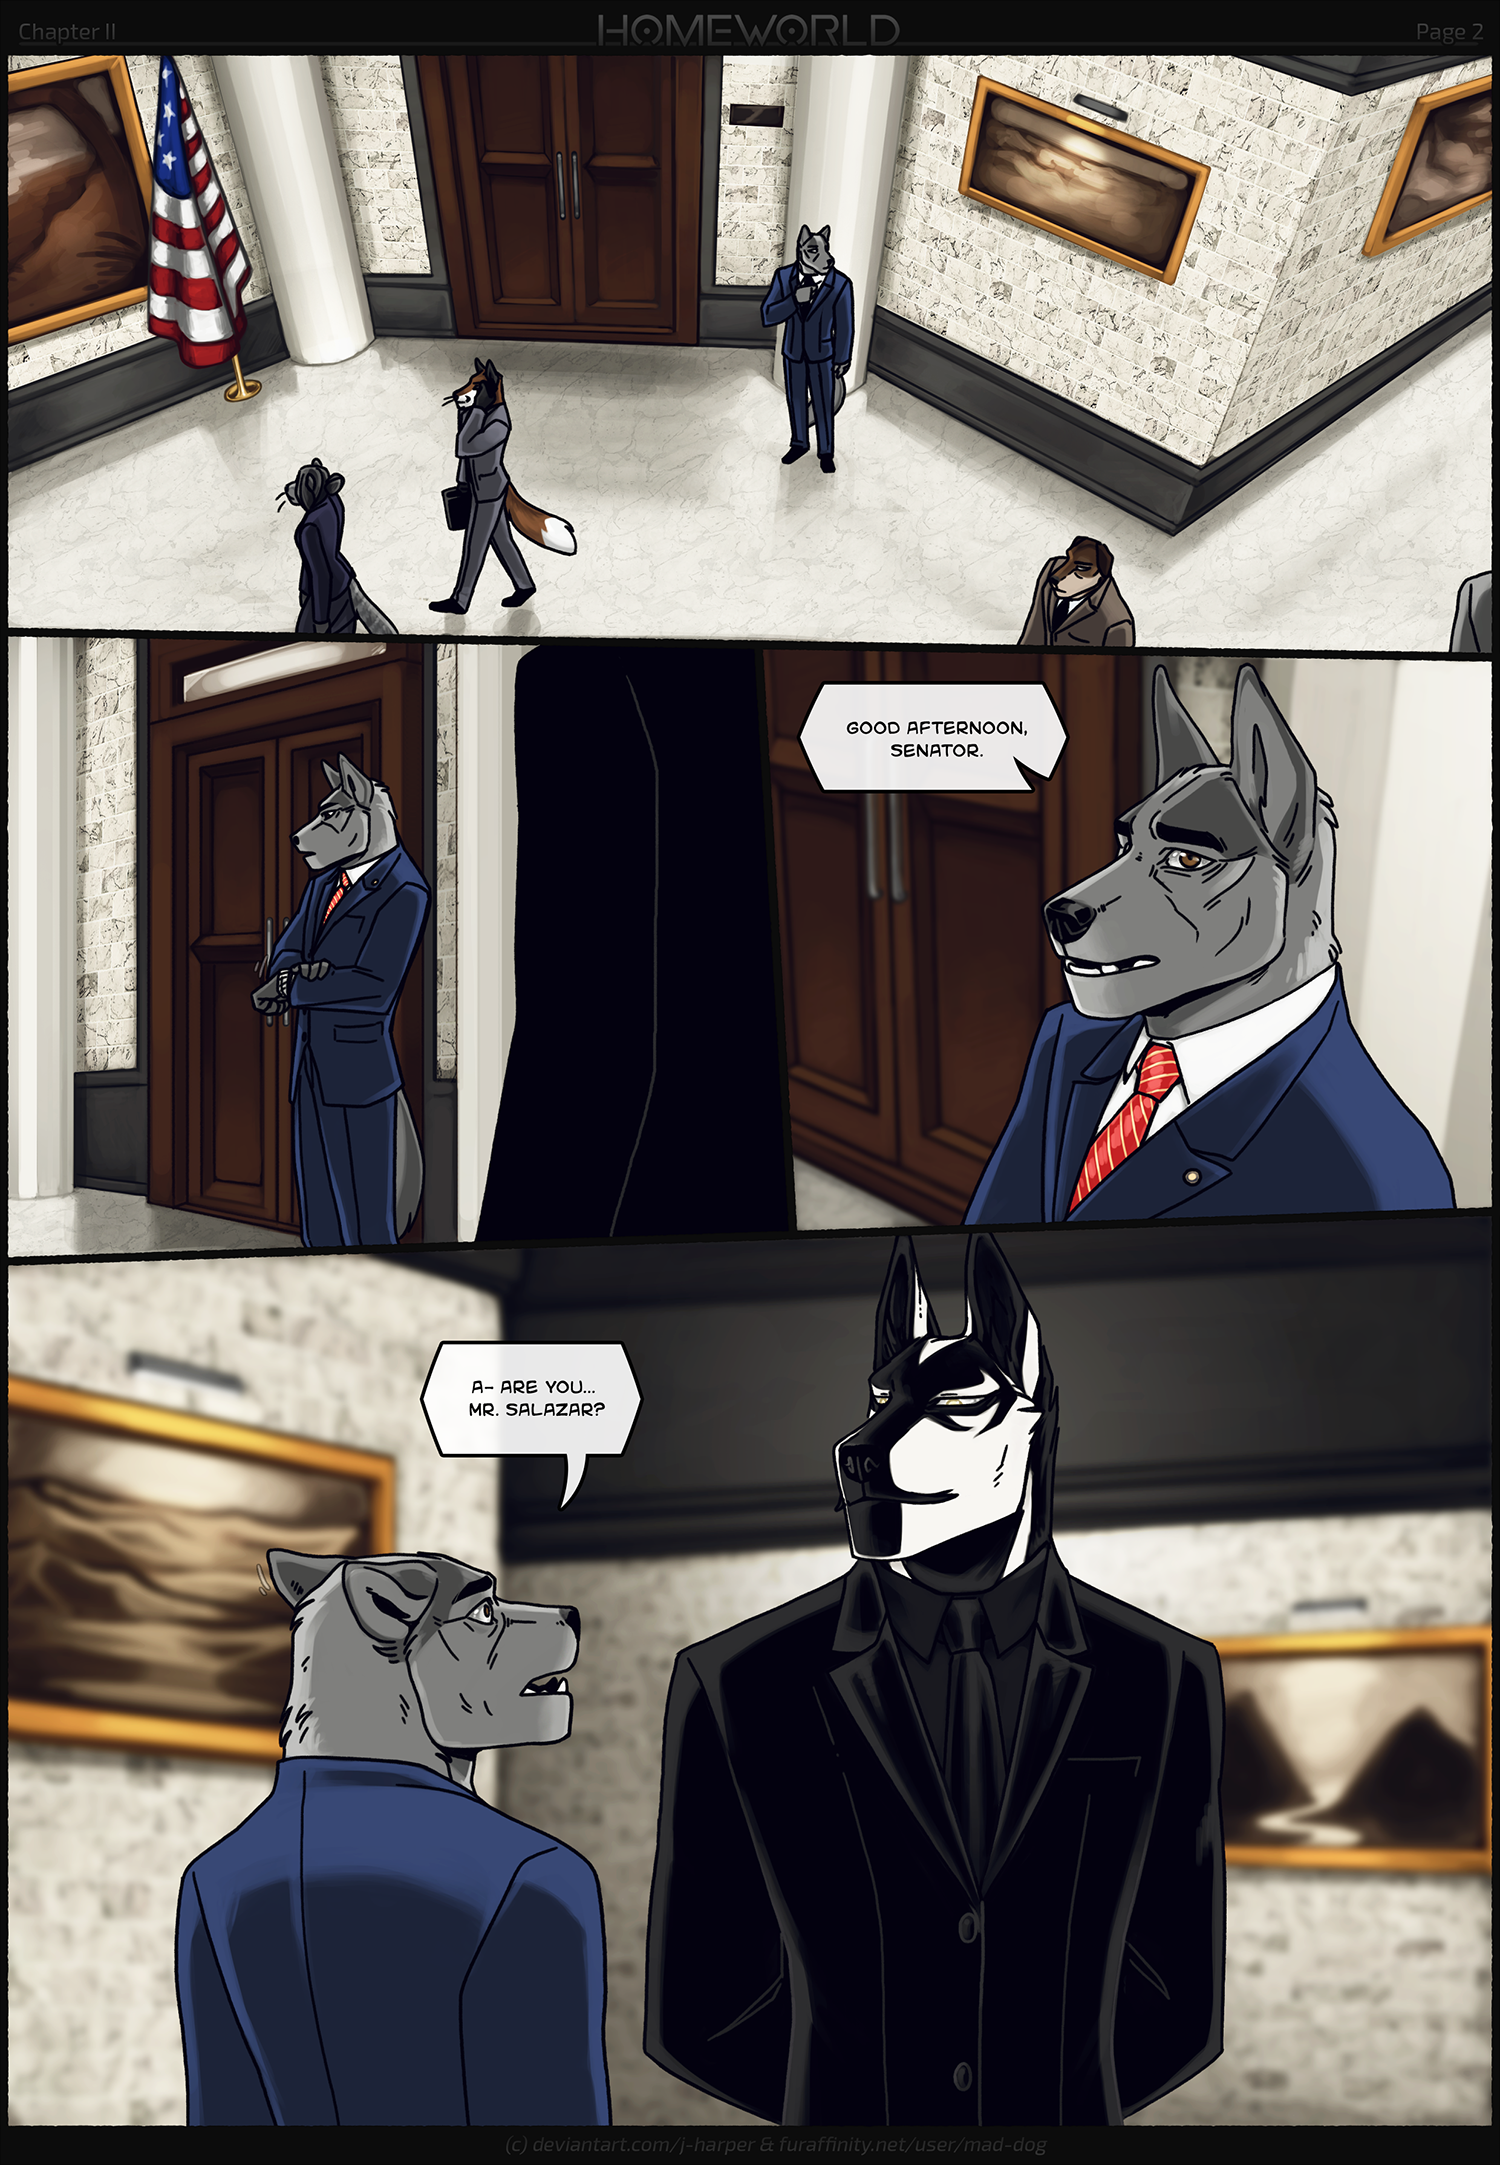 HOMEWORLD Chapter II Page 2 by Mad-dog -- Fur Affinity [dot] net